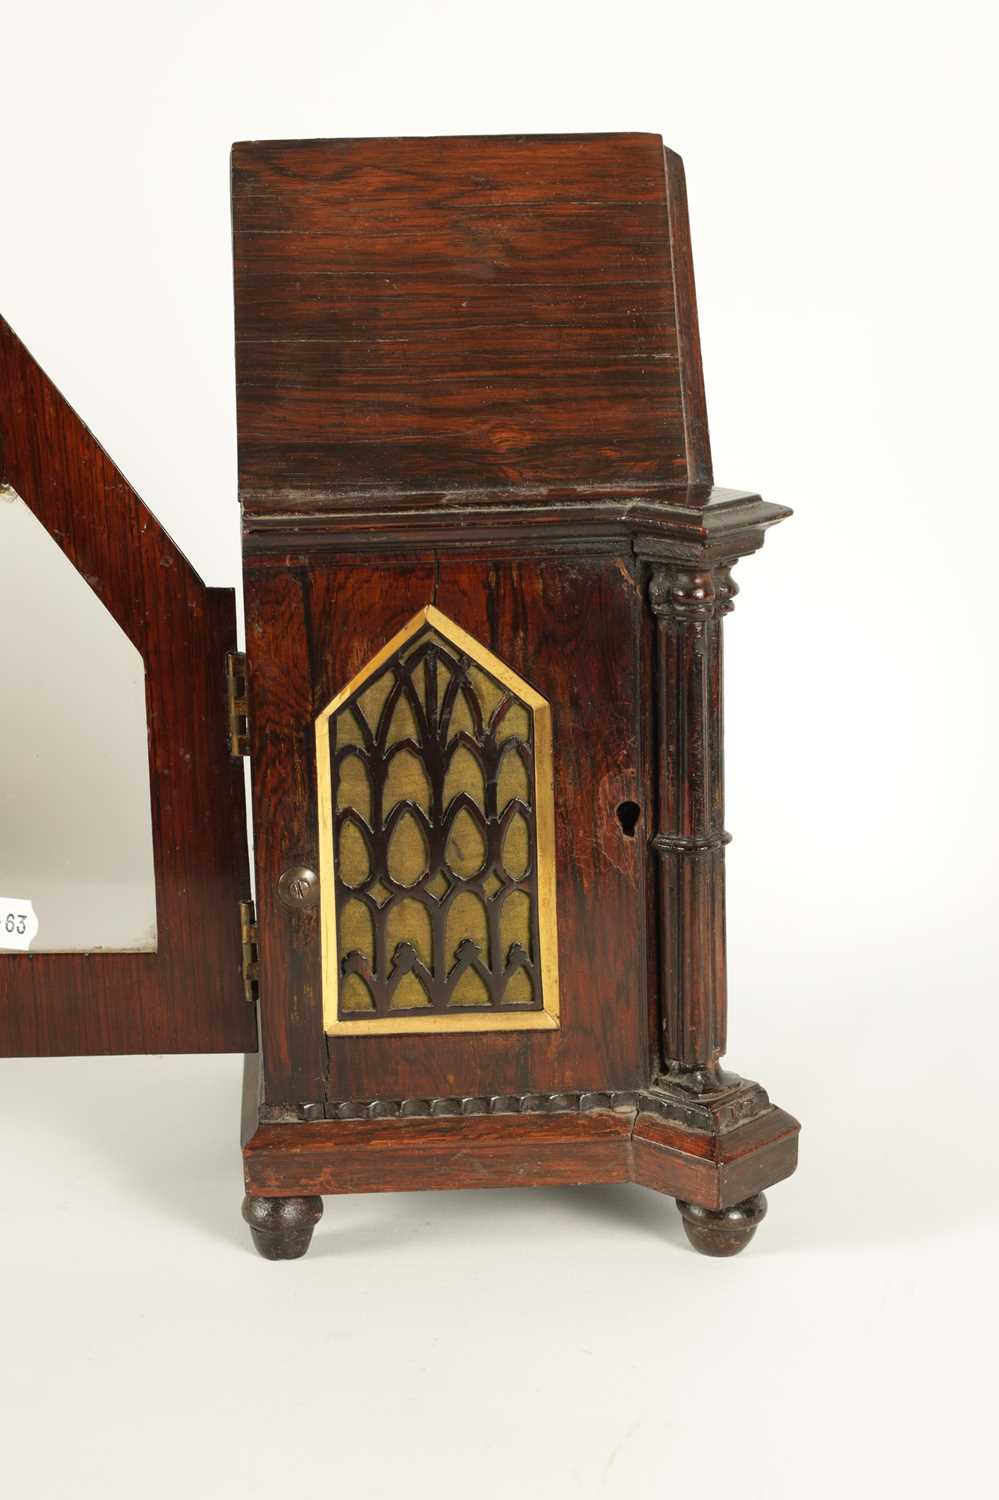 VINER & CO. LONDON. A 19TH CENTURY ROSEWOOD CASED GOTHIC REVIVAL DOUBLE FUSEE MANTEL CLOCK OF SMALL - Image 3 of 7